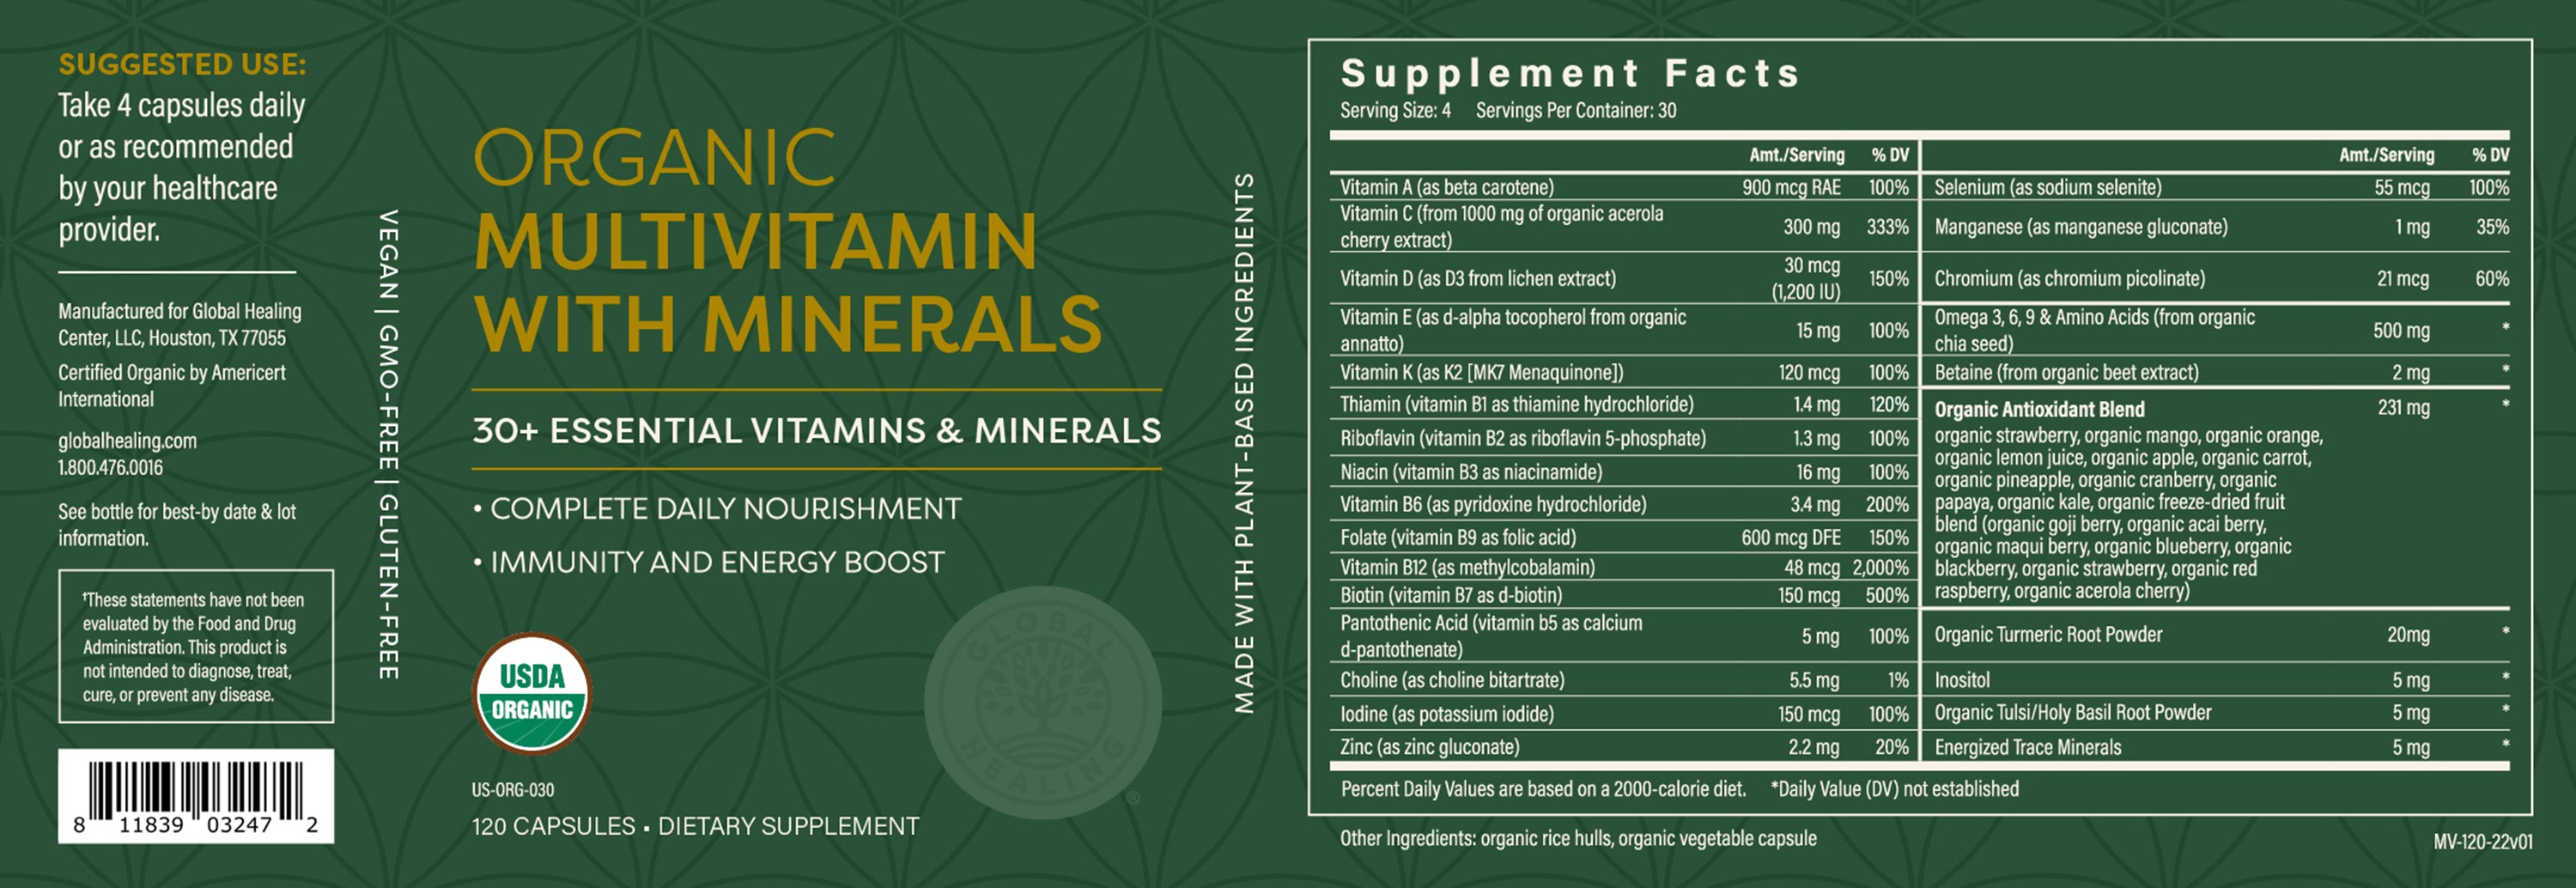 Global Healing Organic Mulitvitamin with minerals Bottle label 120 capsules